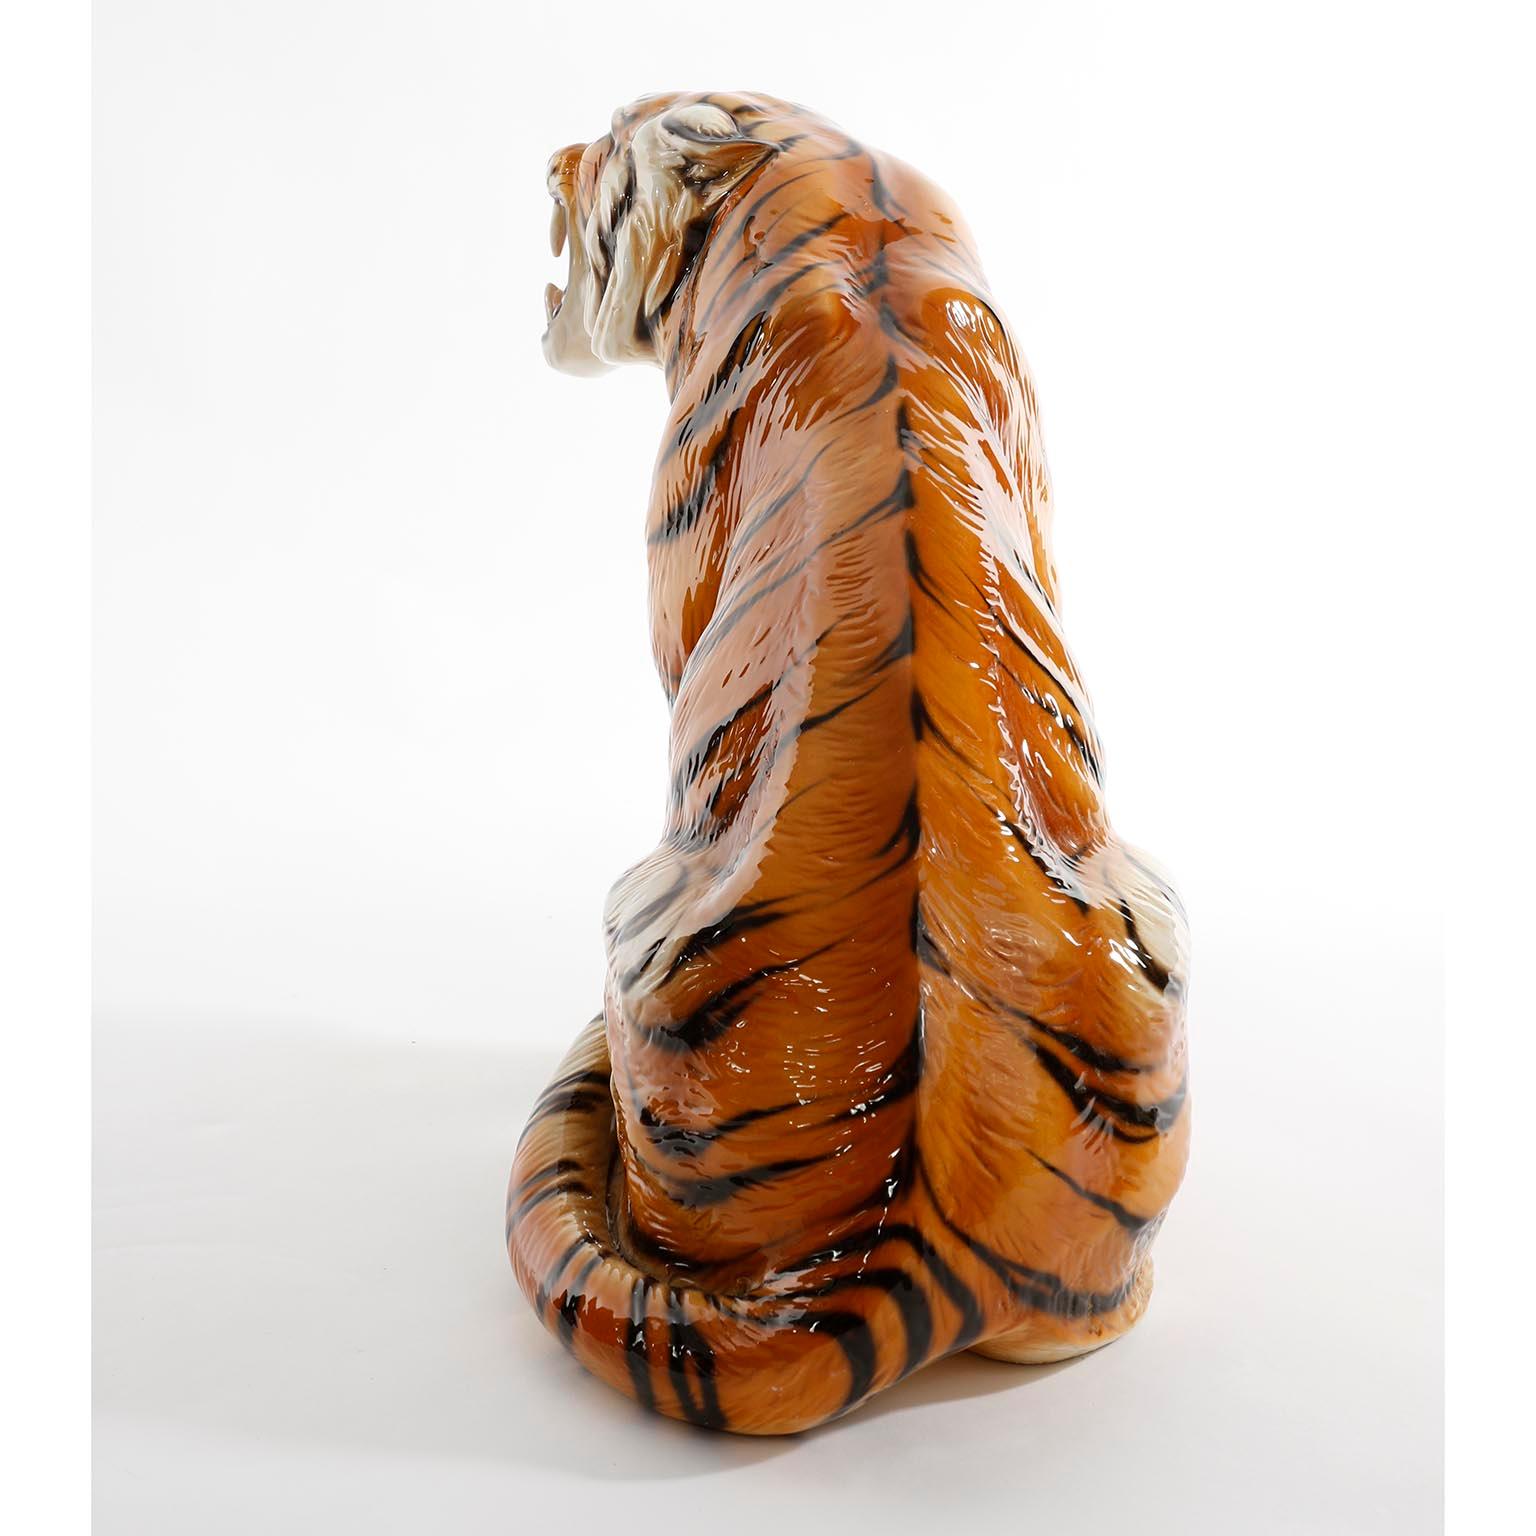 Italian Mid-Century Modern Ceramic Tiger by Ronzan, Italy, 1950s For Sale